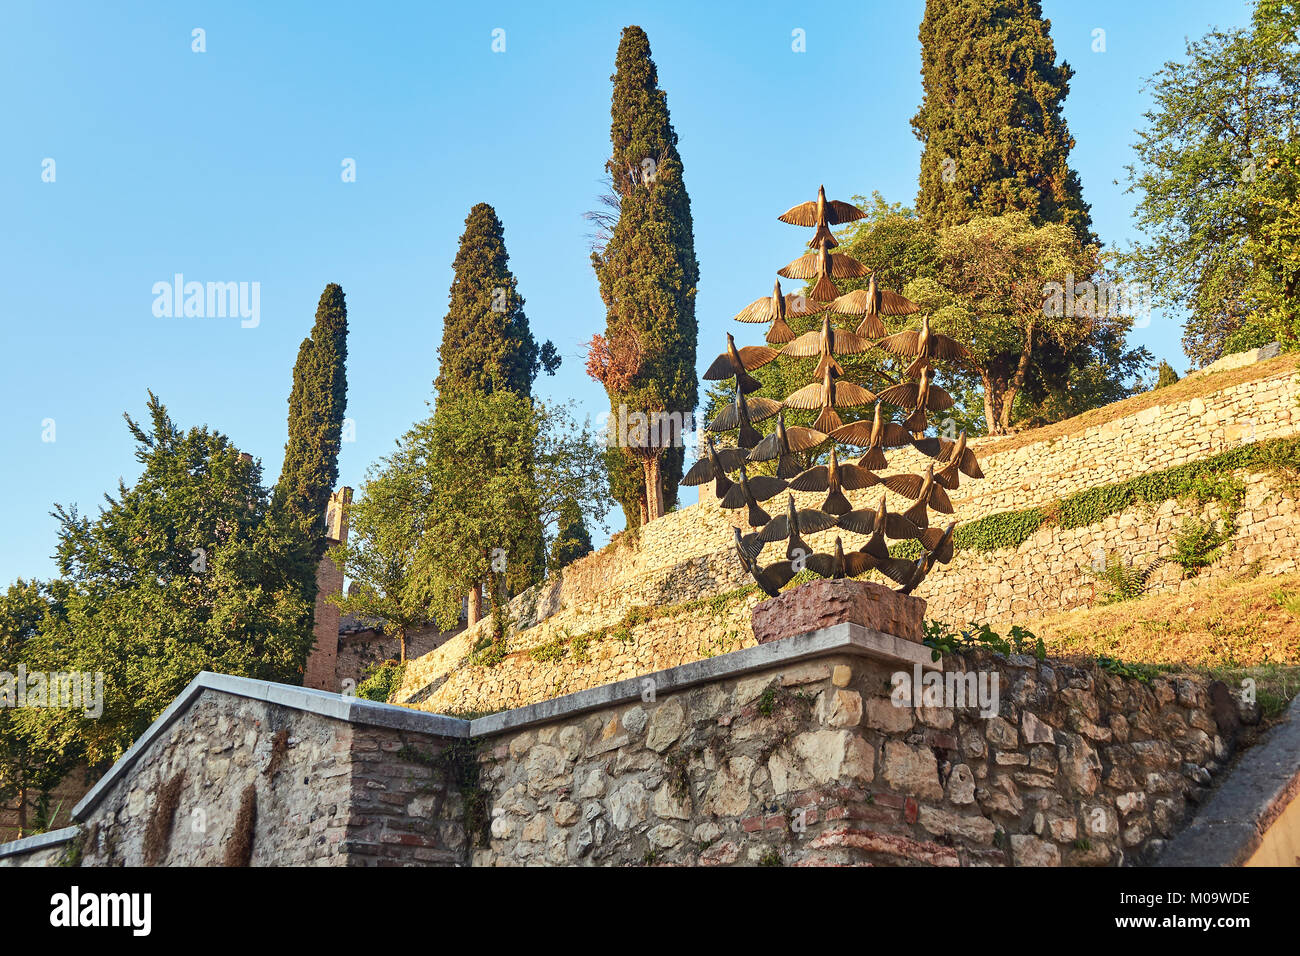 Birds monument on the castle hill in Soave, Italy Stock Photo